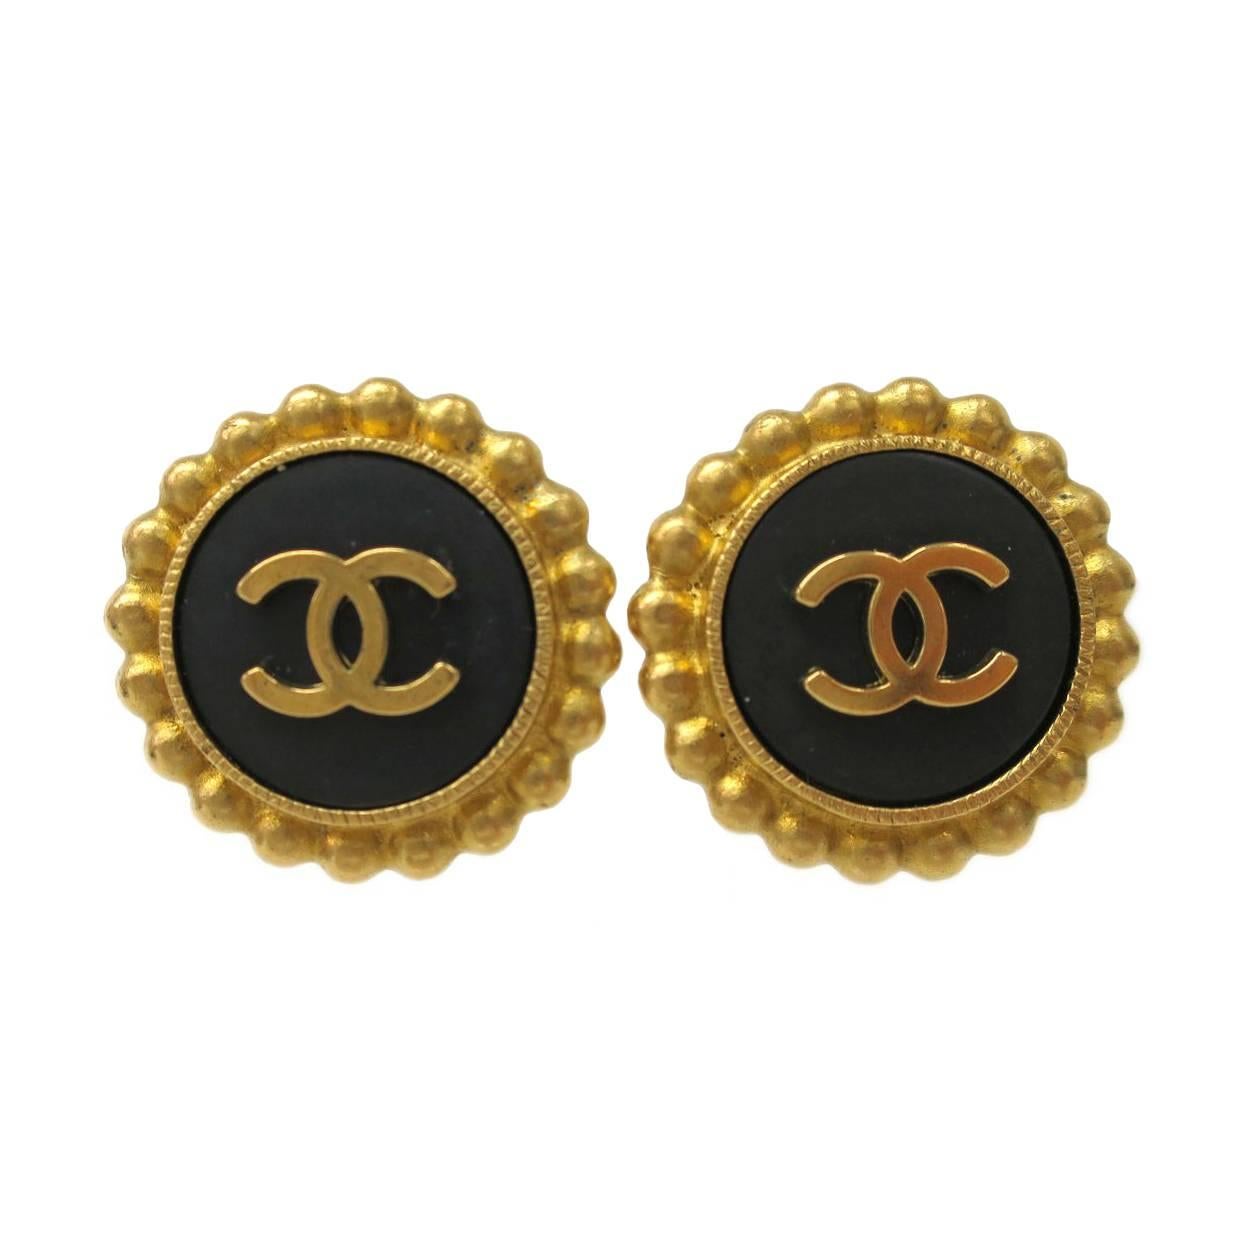 Chanel Vintage CC Round Button Gold Black Earrings